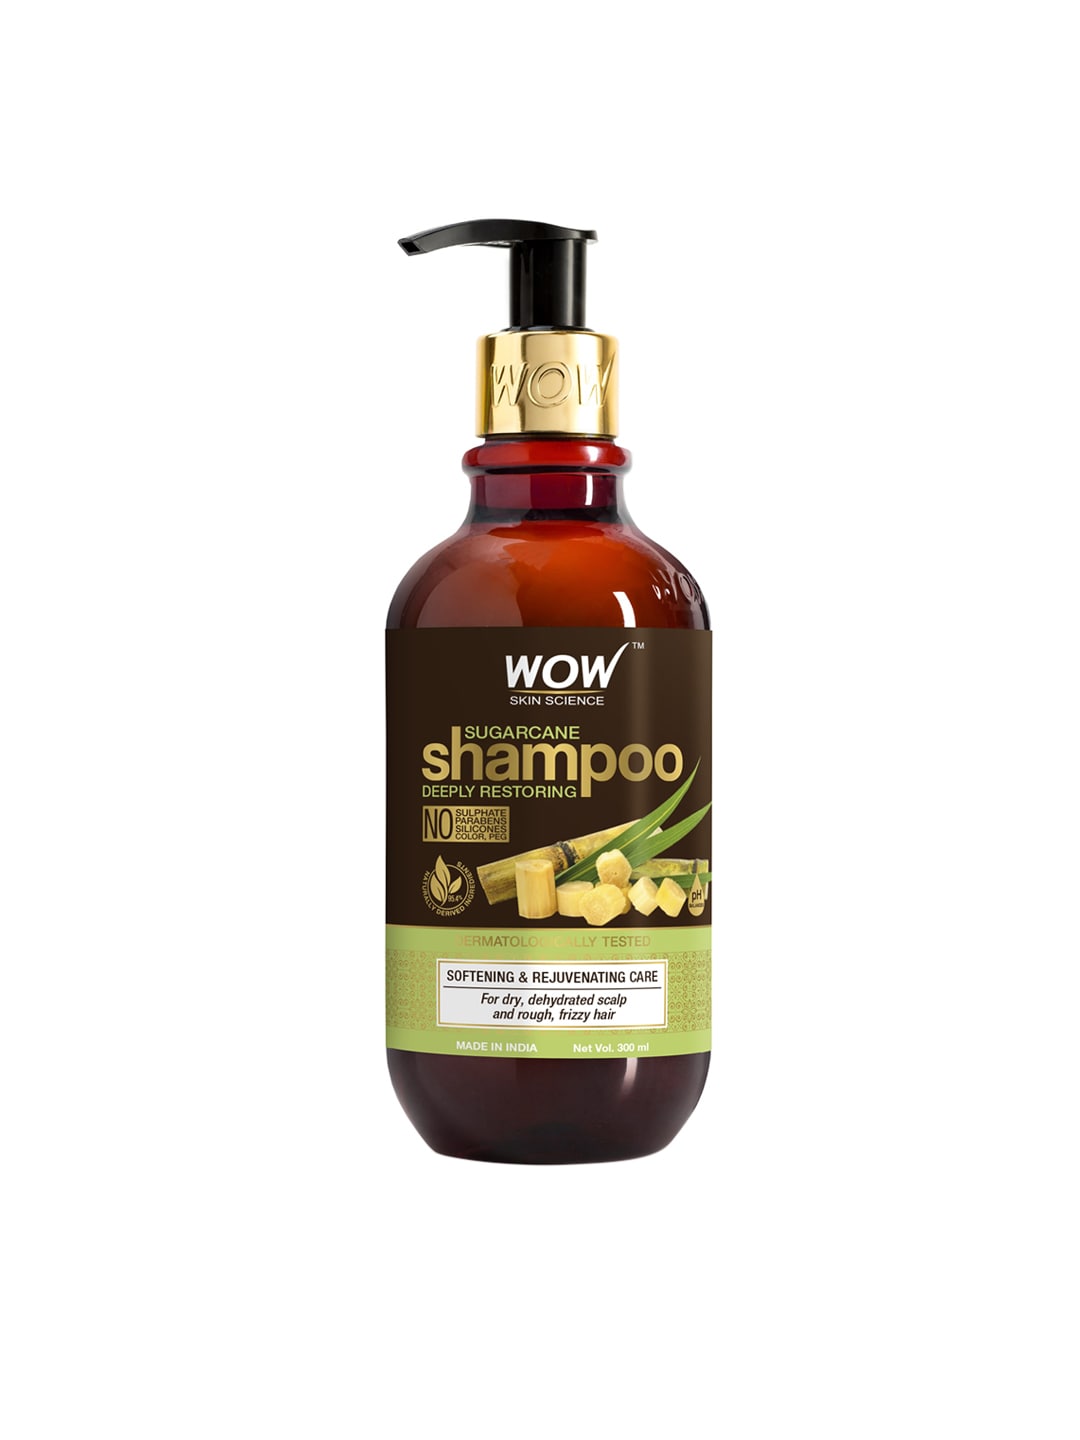 WOW SKIN SCIENCE Sugarcane Deeply Restoring Shampoo for Dry & Frizzy Hair - 300ml Price in India